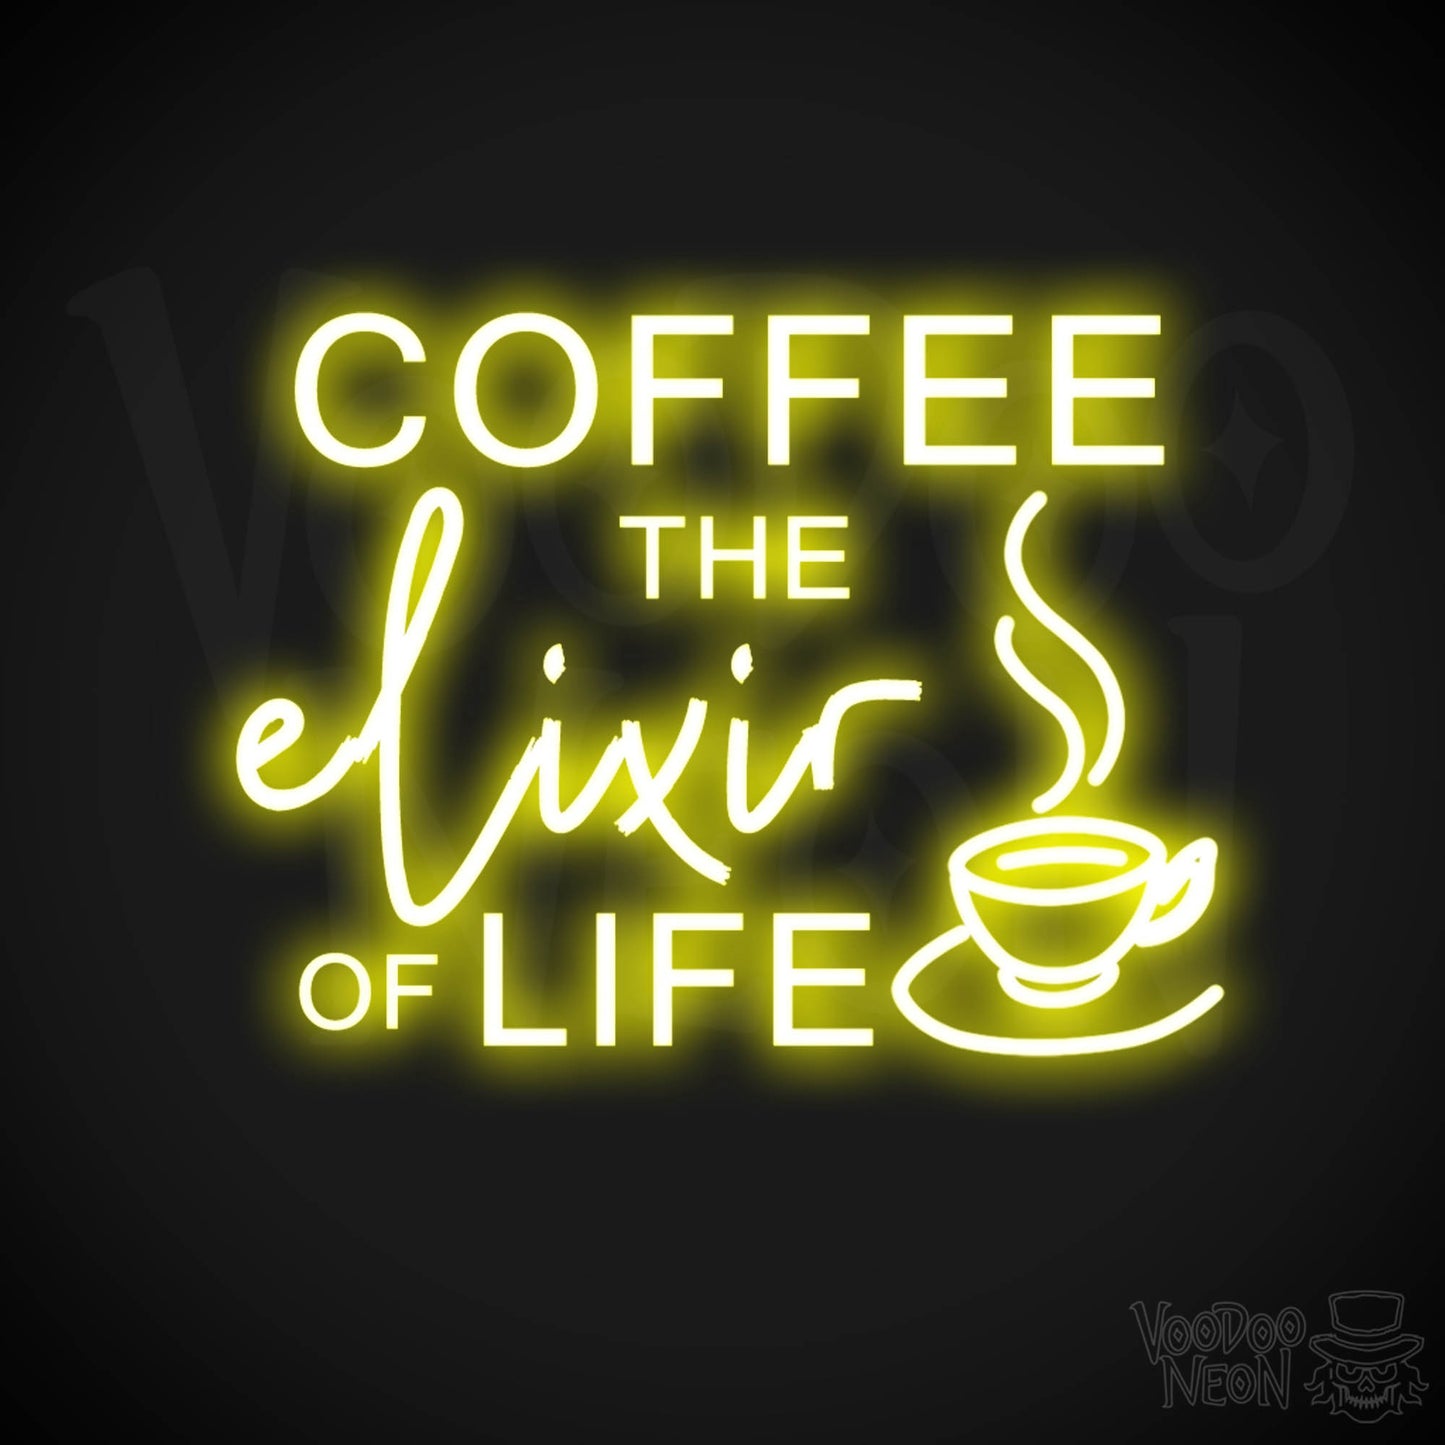 Coffee - The Elixir Of Life Neon Sign - The Elixir Of Life Sign - Color Yellow